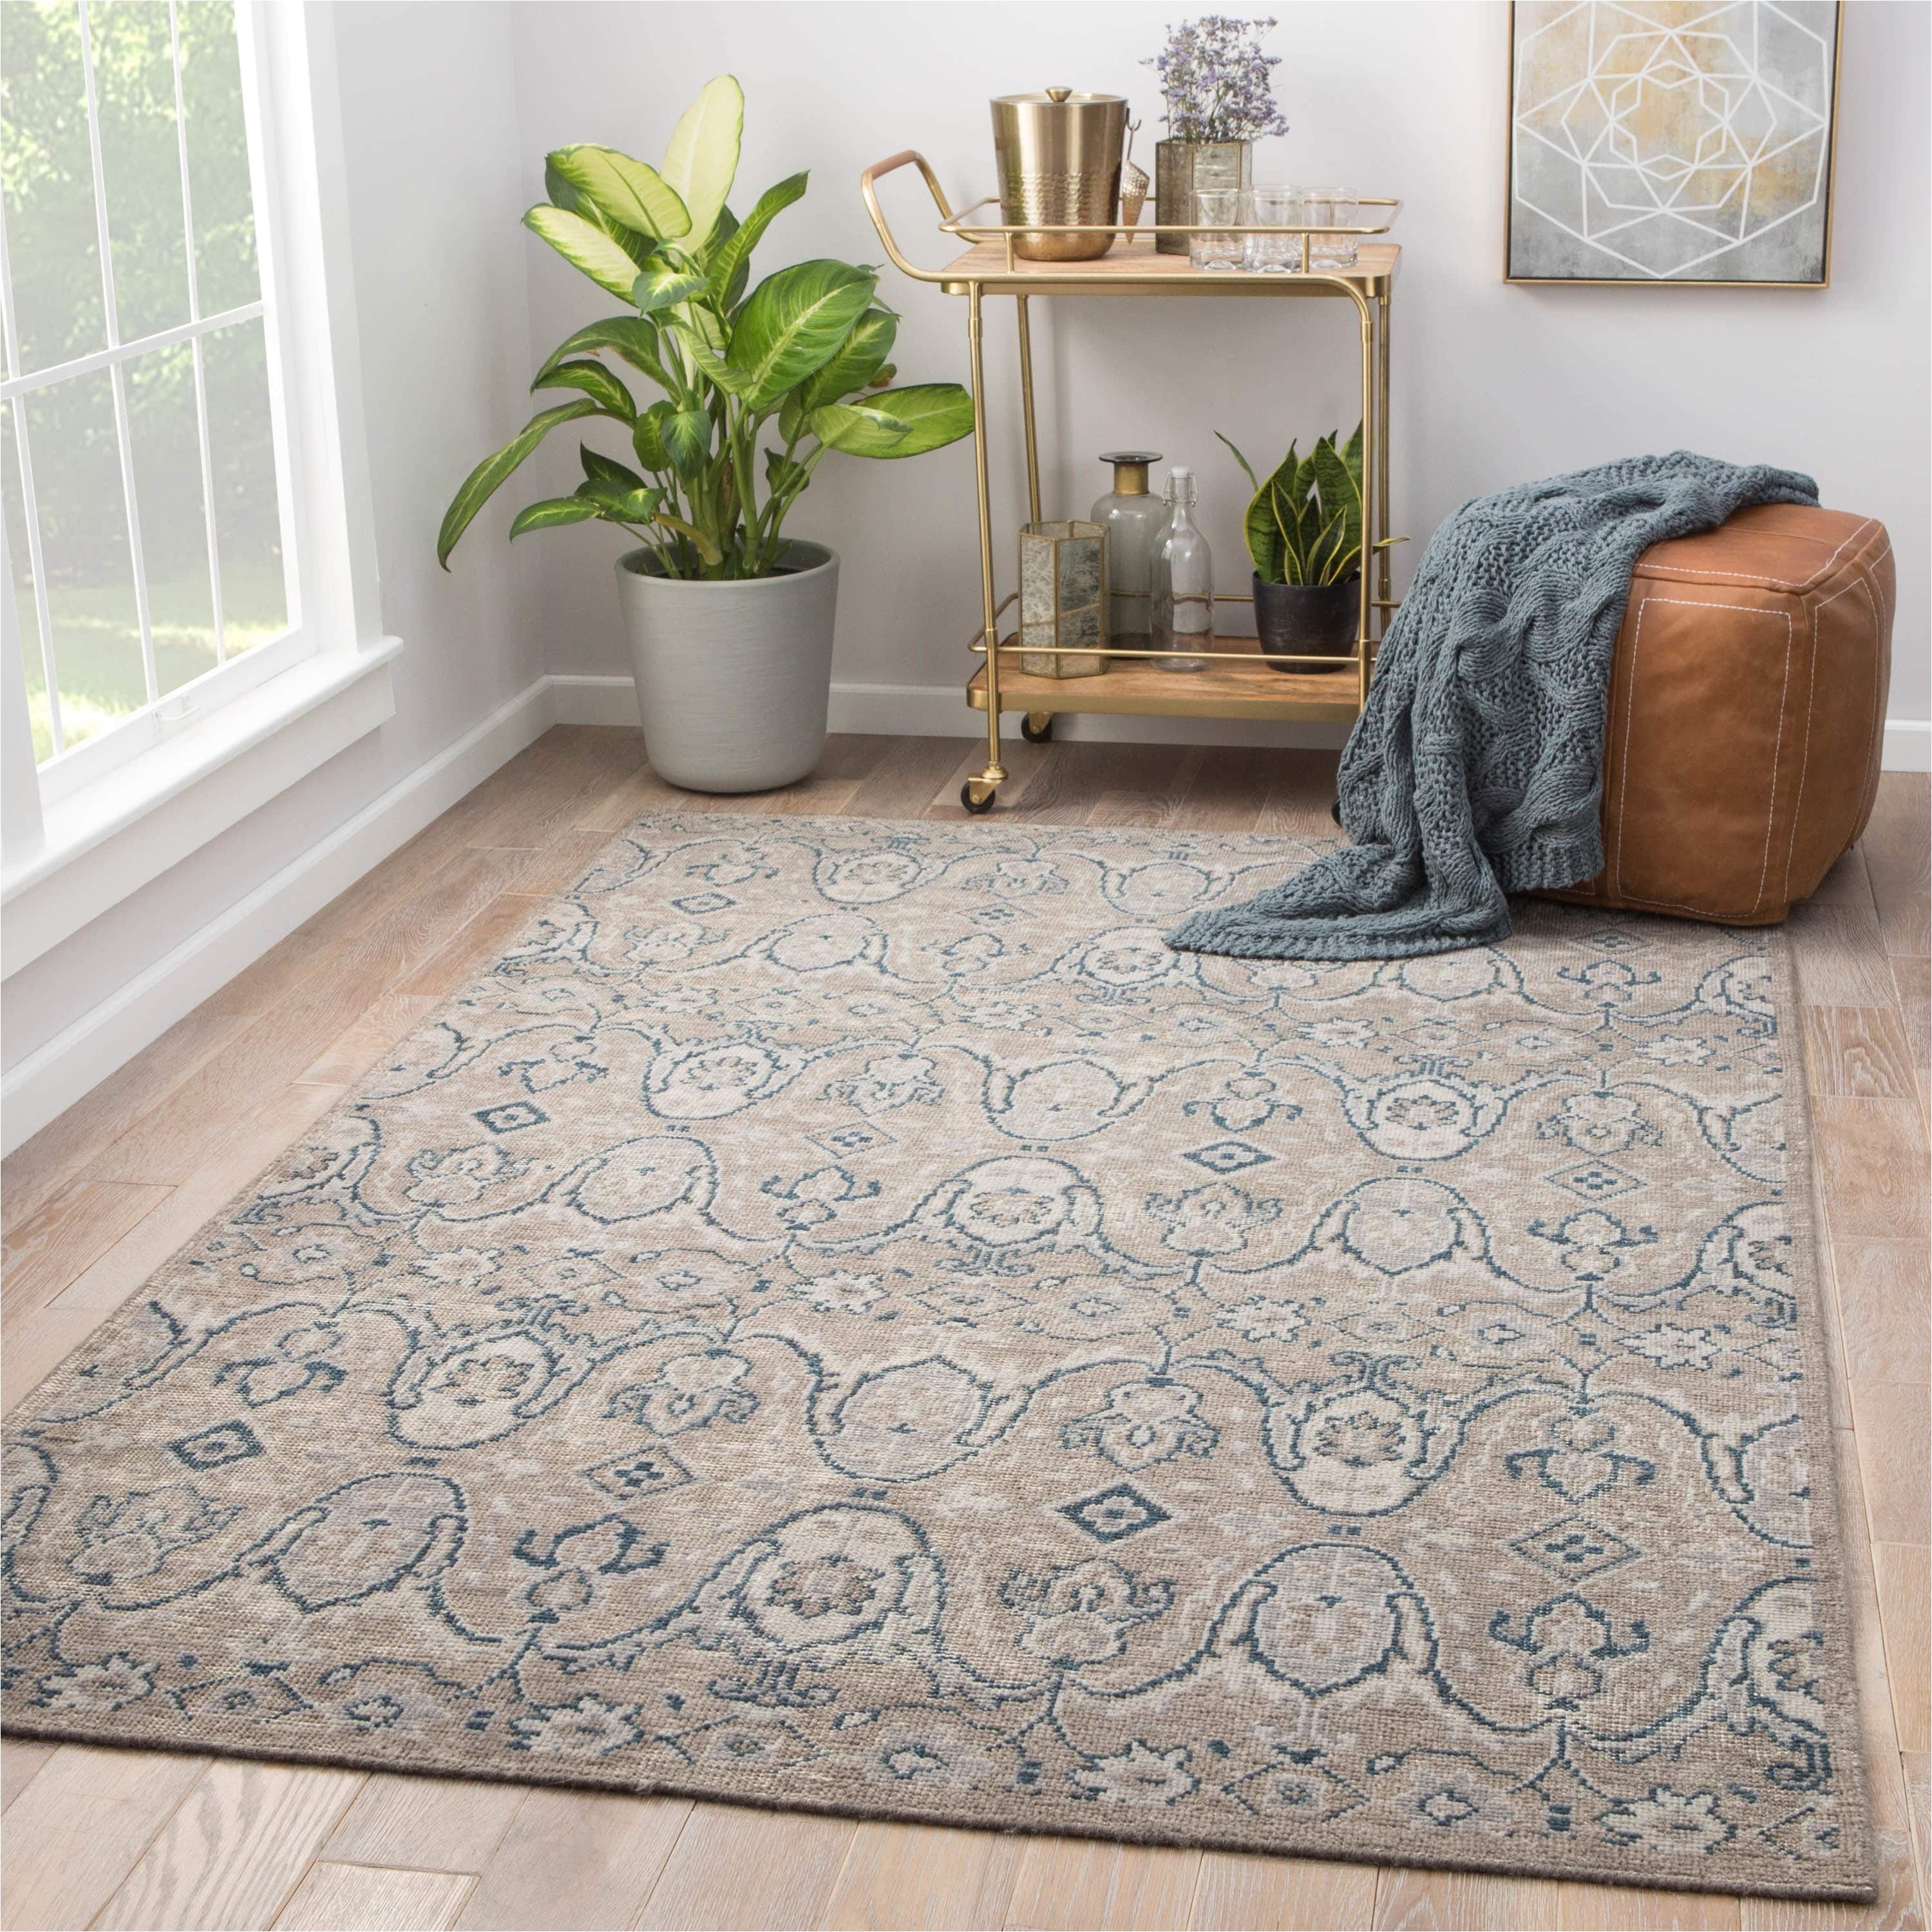 juniper home angkor hand knotted medallion gray navy area rug 8 x 10 8 x 10 grey size 8 x 10